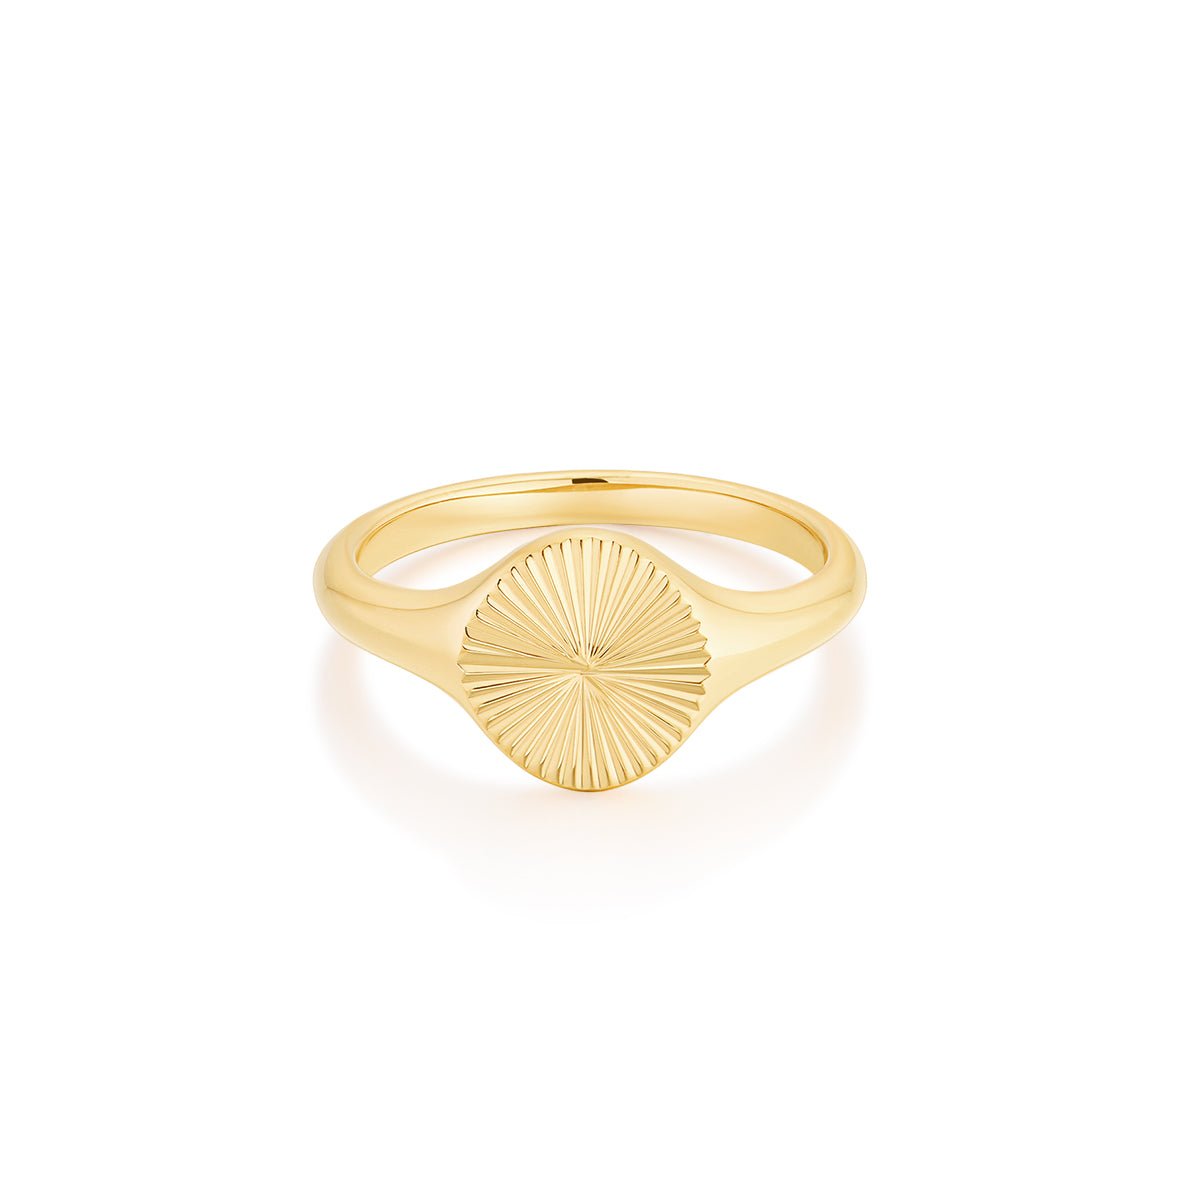 BYOU Jewelry - Gold Sunburst Stacking Ring – BYOUJEWELRY